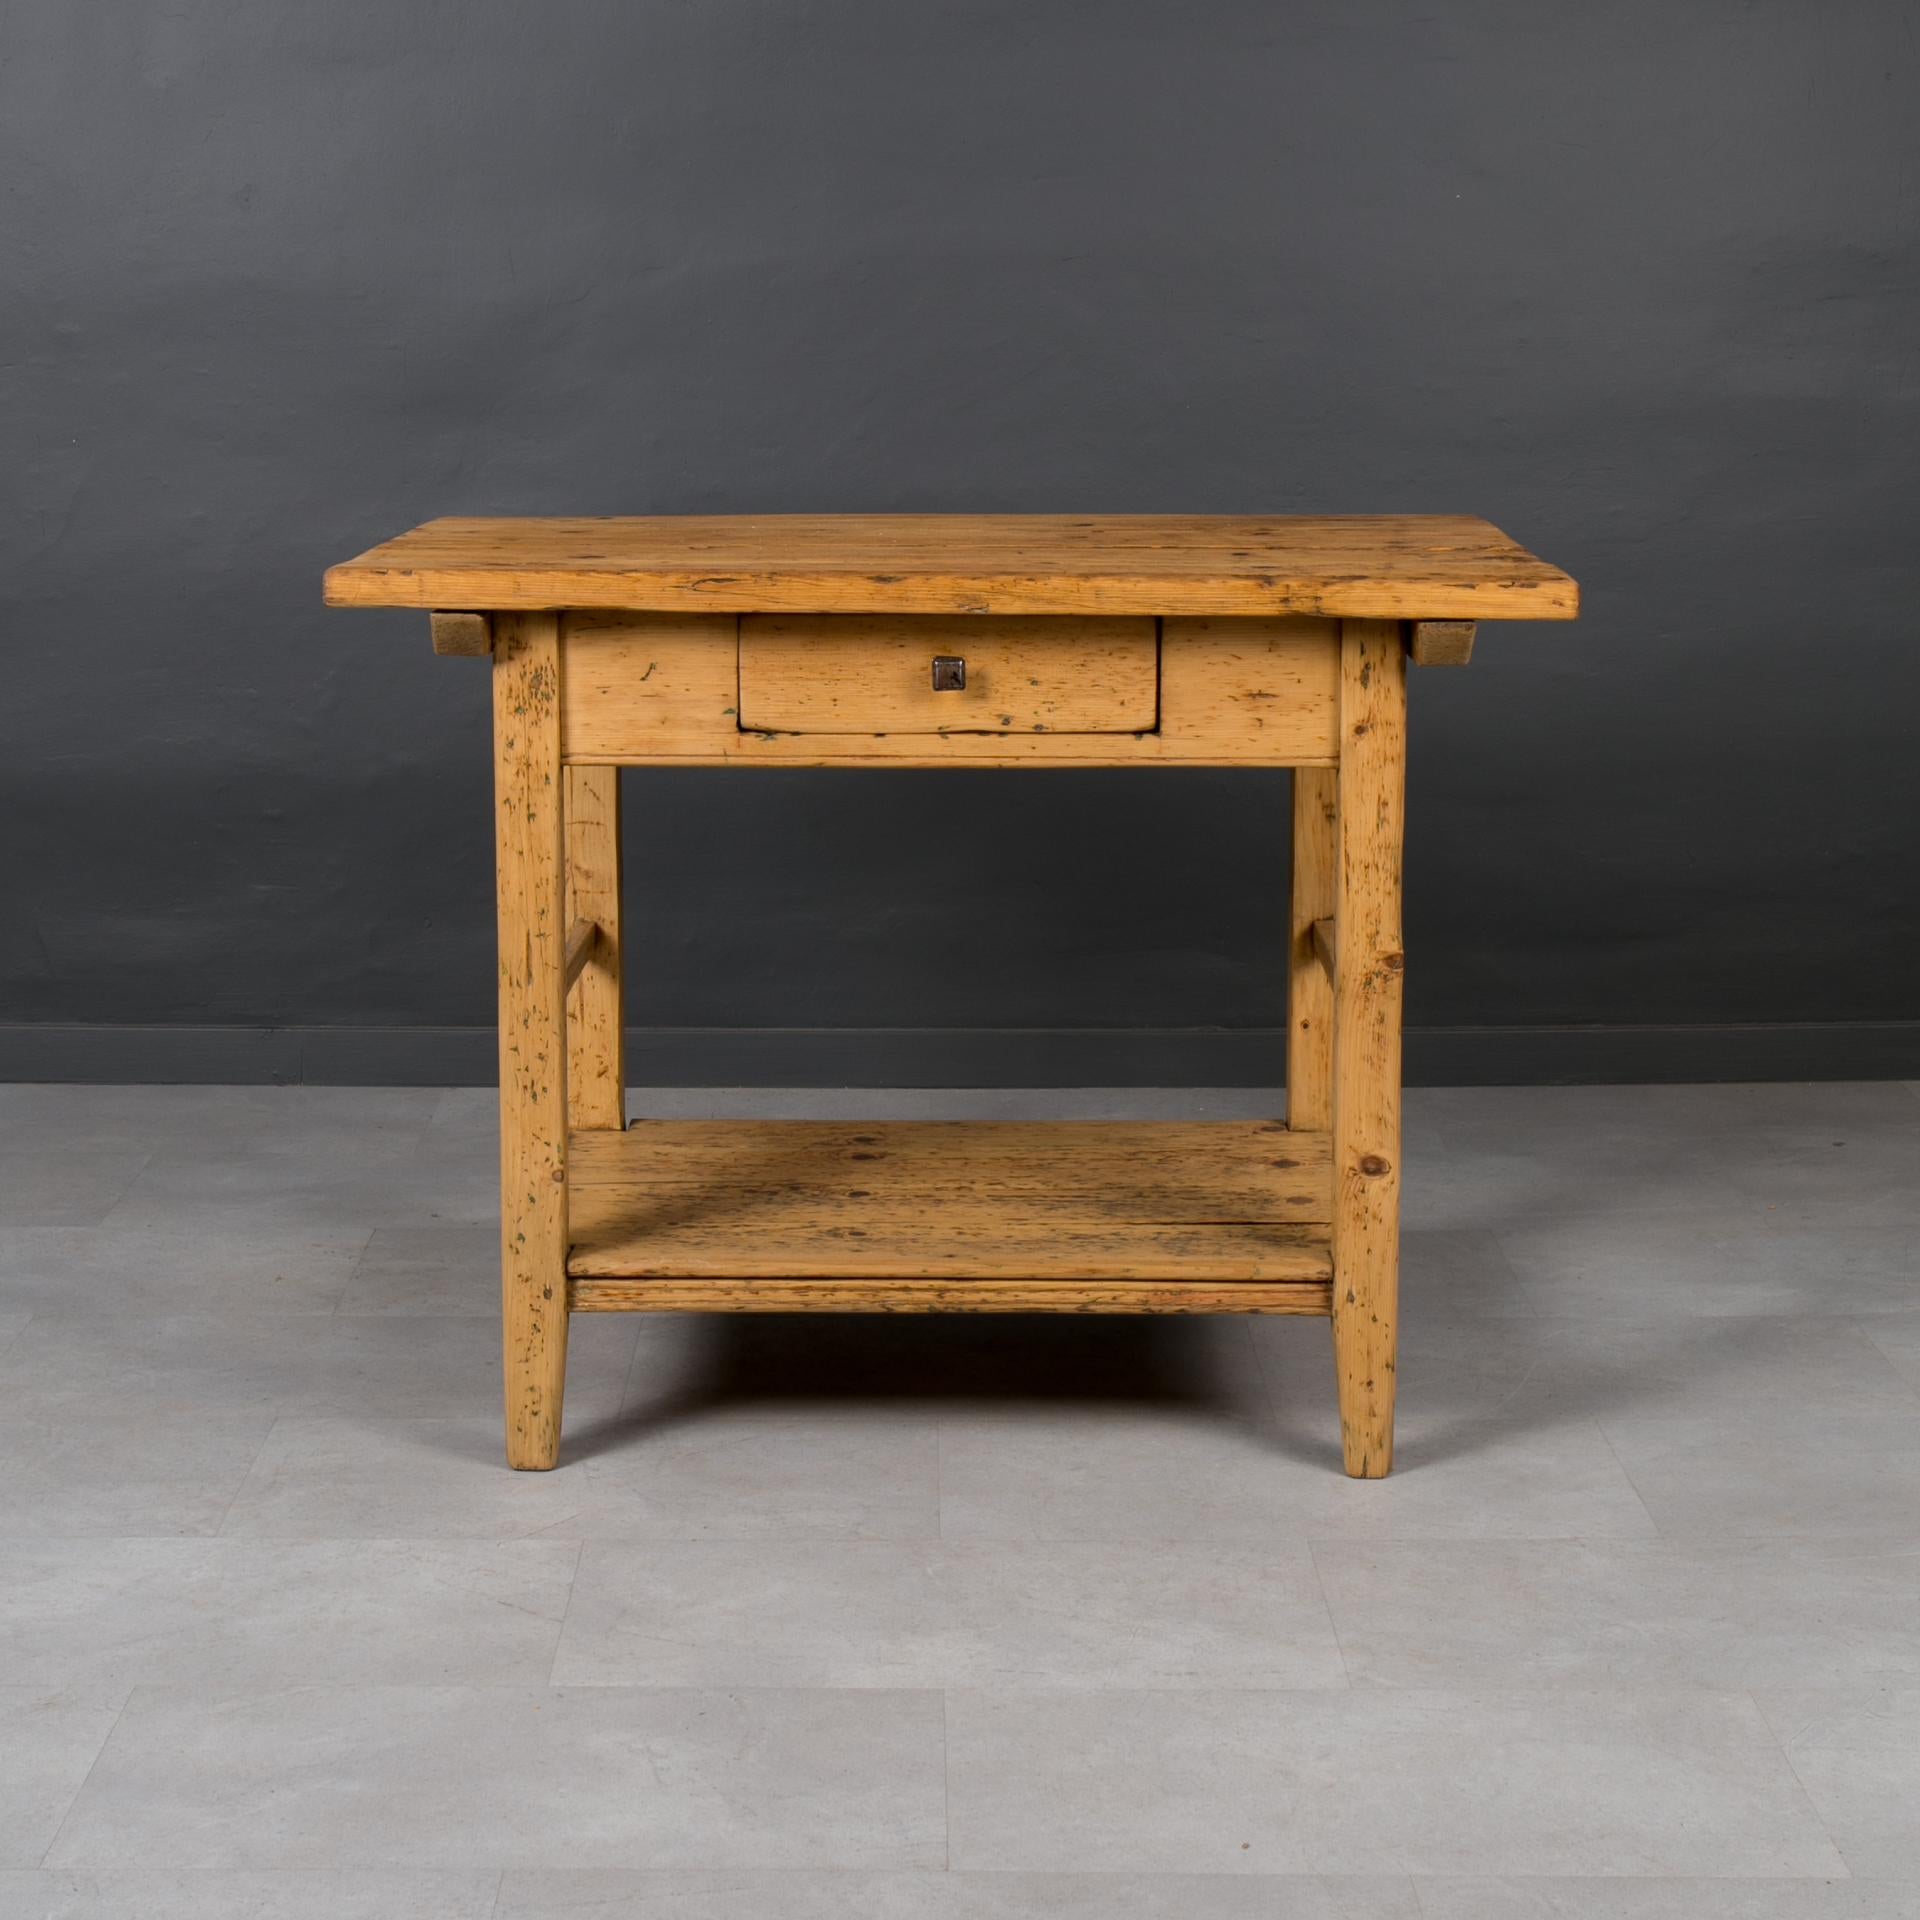 This charming vintage table was made in late 19th Century in Hungary. The whole piece is made of pine wood. The top is set on a solid base with a wide apron. One practical drawer resides in the apron. The piece was gently refreshed and finished with